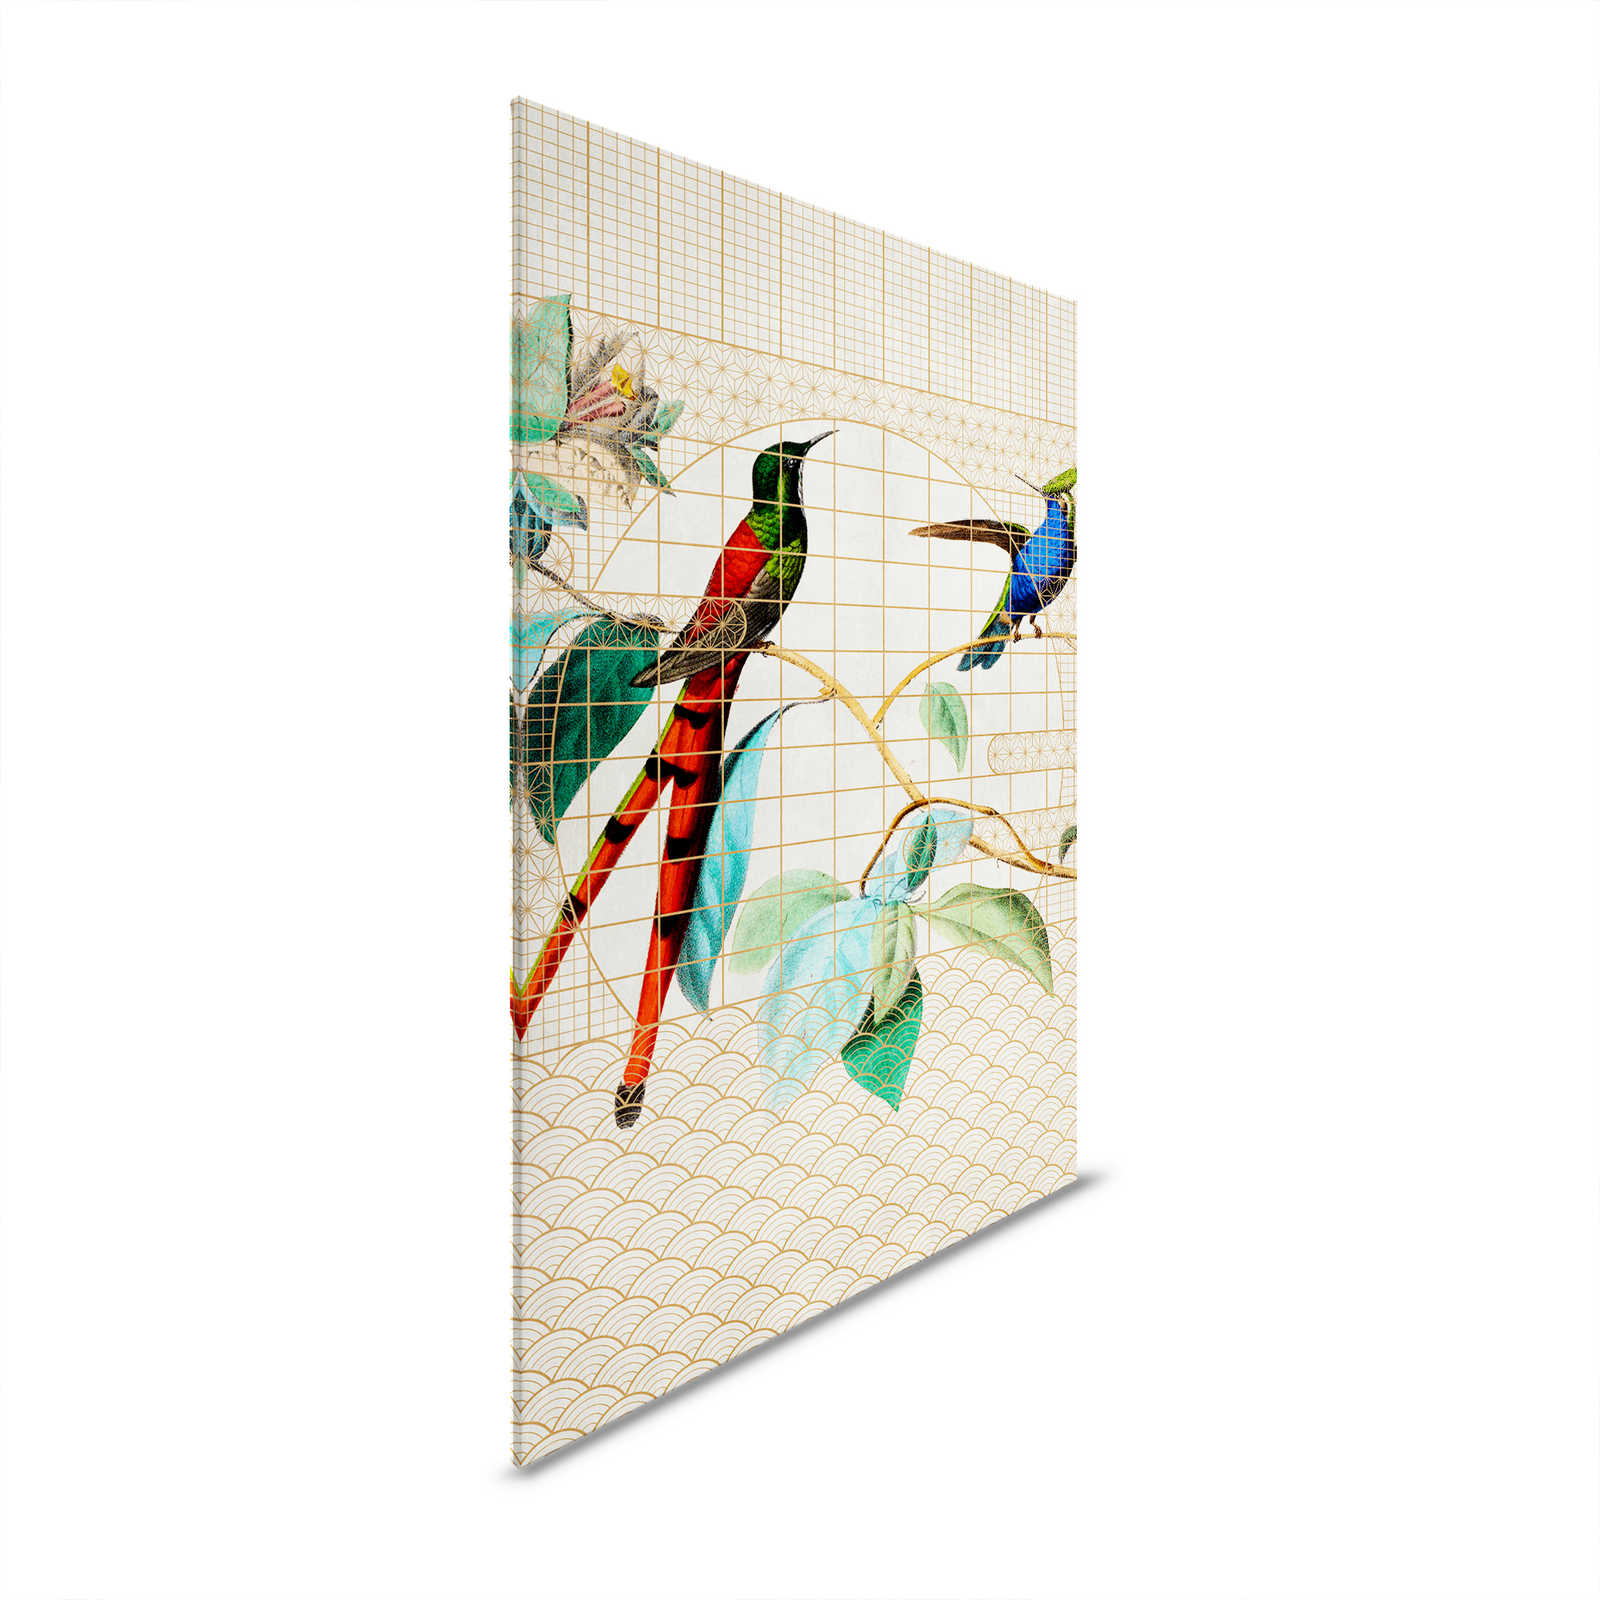 Aviary 2 - Birds Canvas painting Songbirds in a golden cage - 1.20 m x 0.80 m
